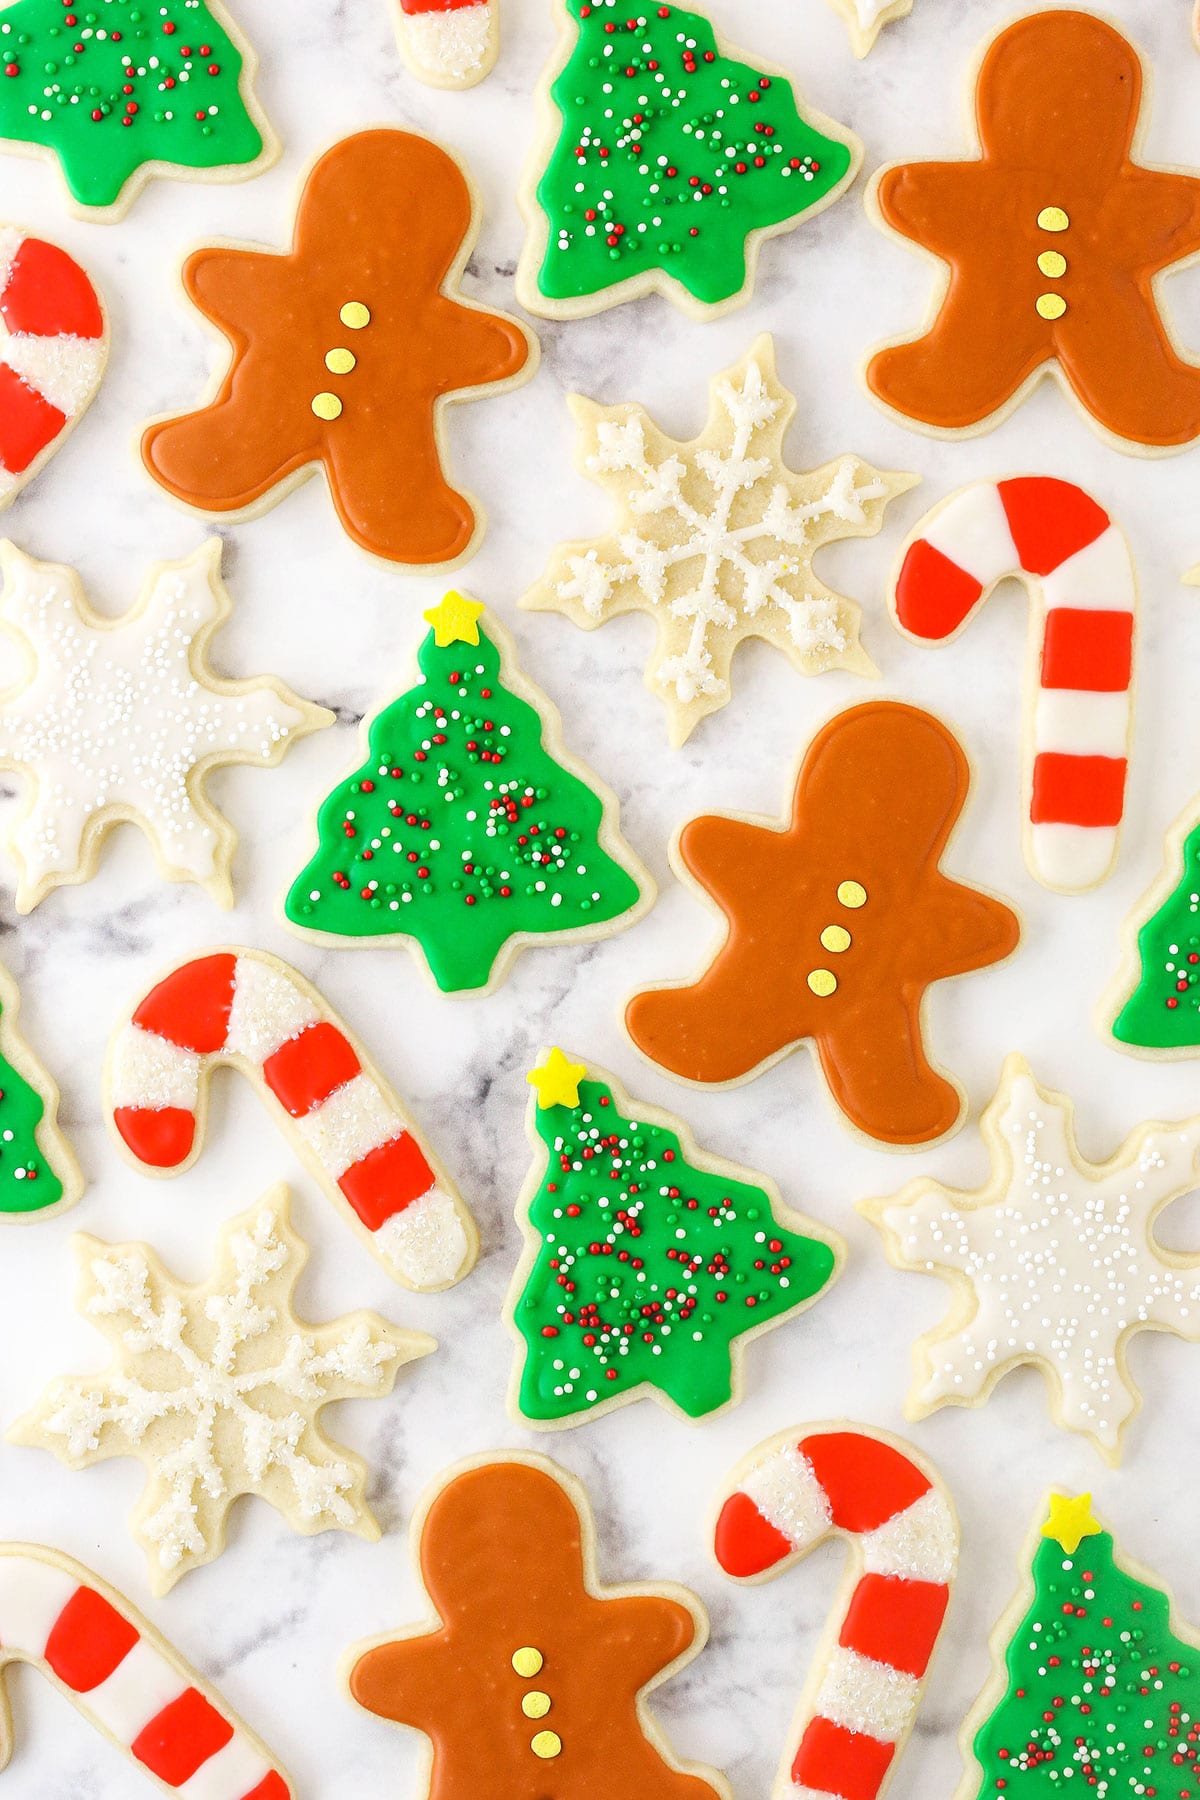 Frosted sugar cookies cut into various Christmas-themed shapes